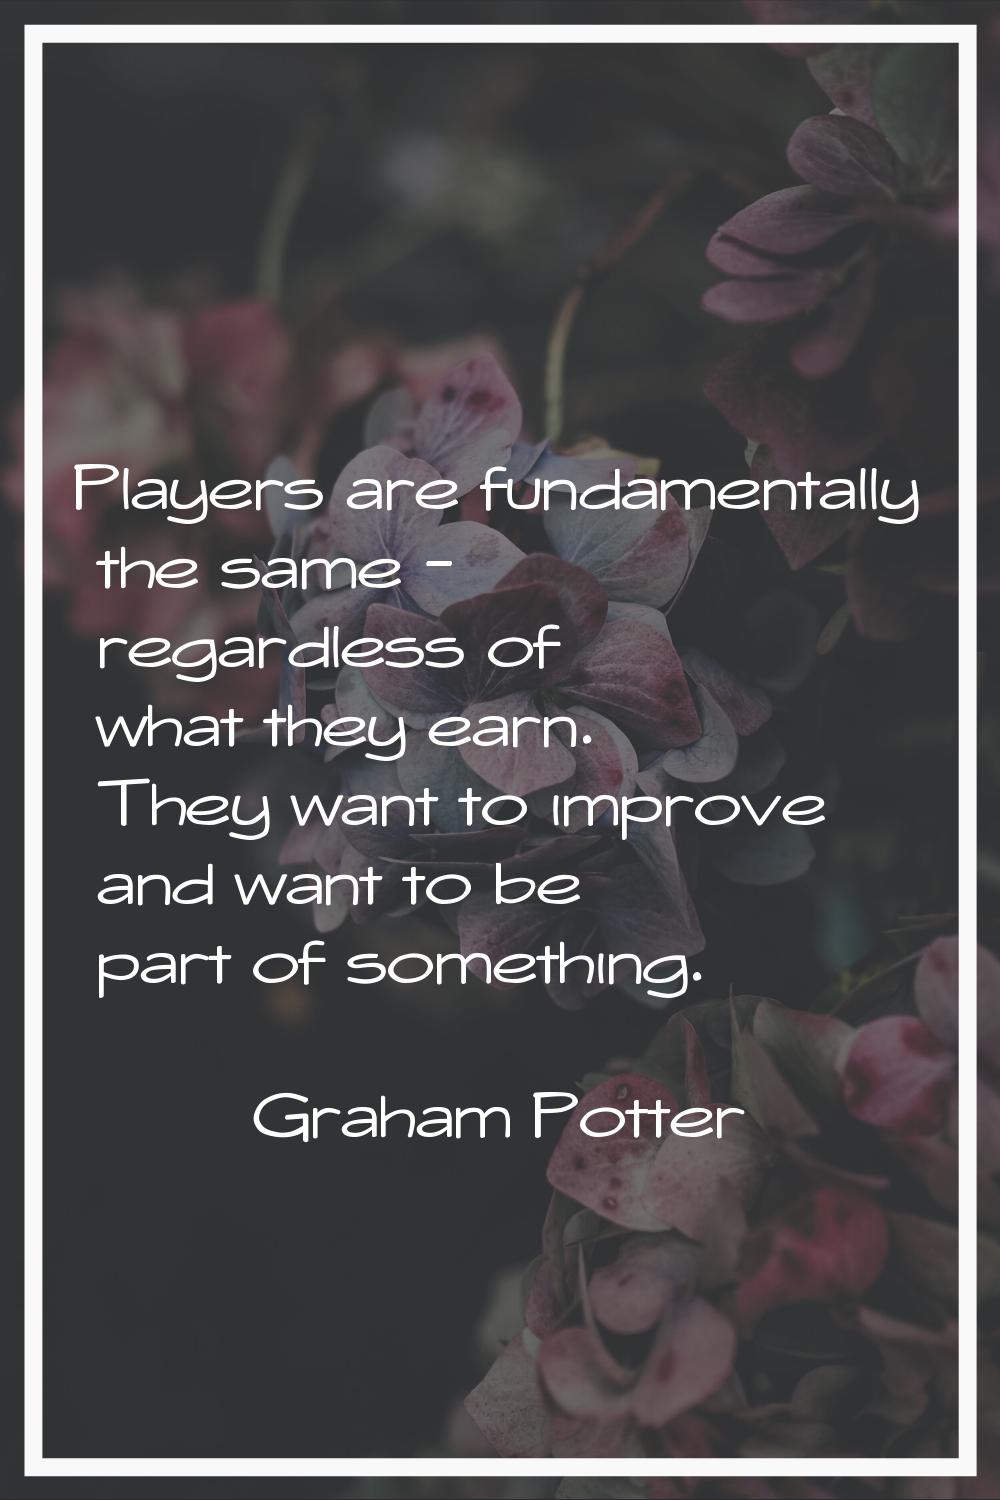 Players are fundamentally the same - regardless of what they earn. They want to improve and want to